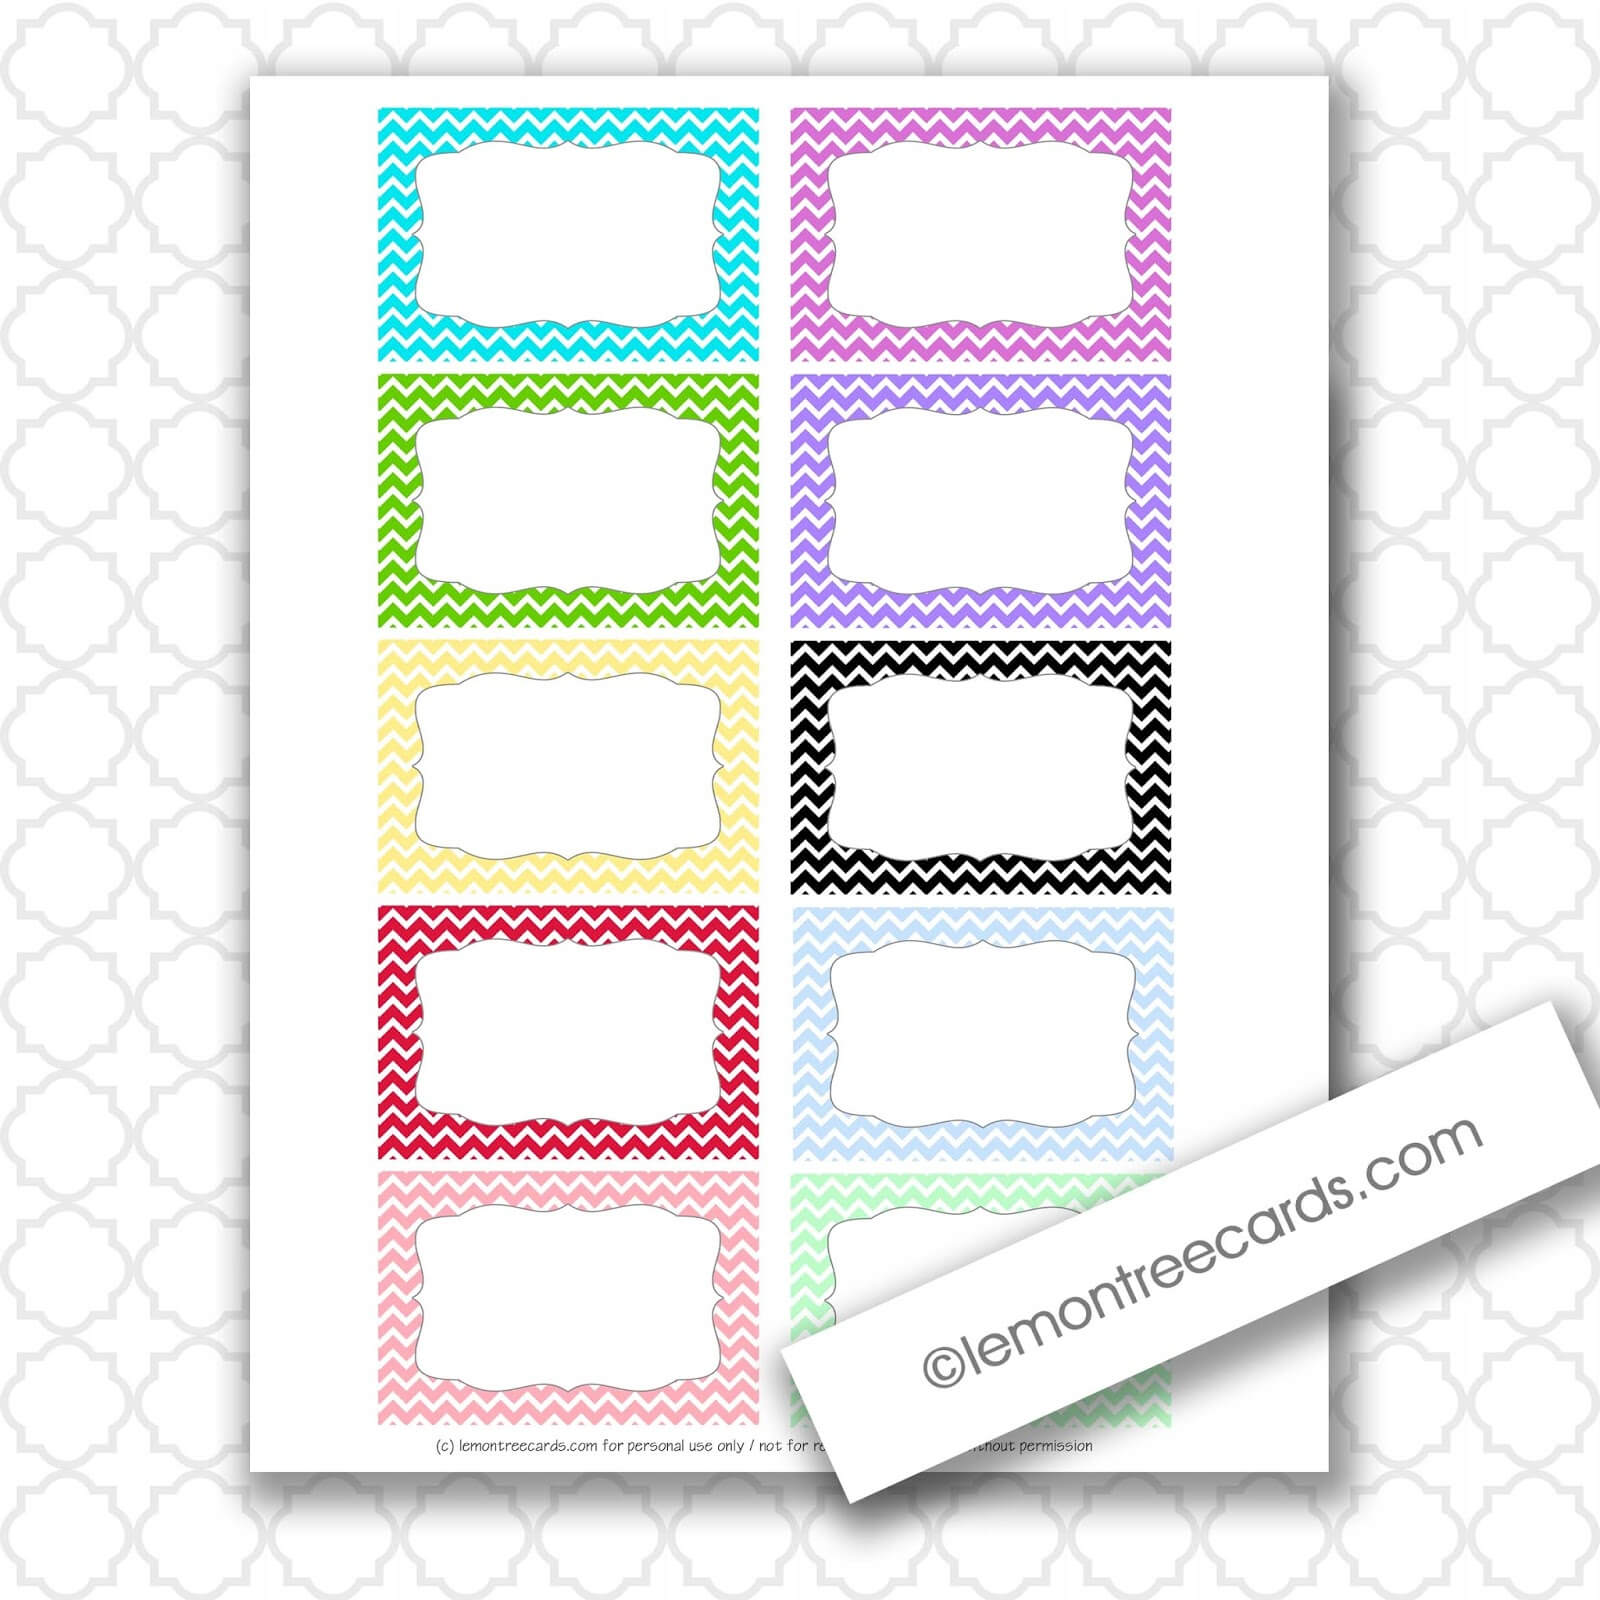 28+ [ 5X7 Index Card Template ] | Avery Avery Quarter Fold With 3X5 Blank Index Card Template